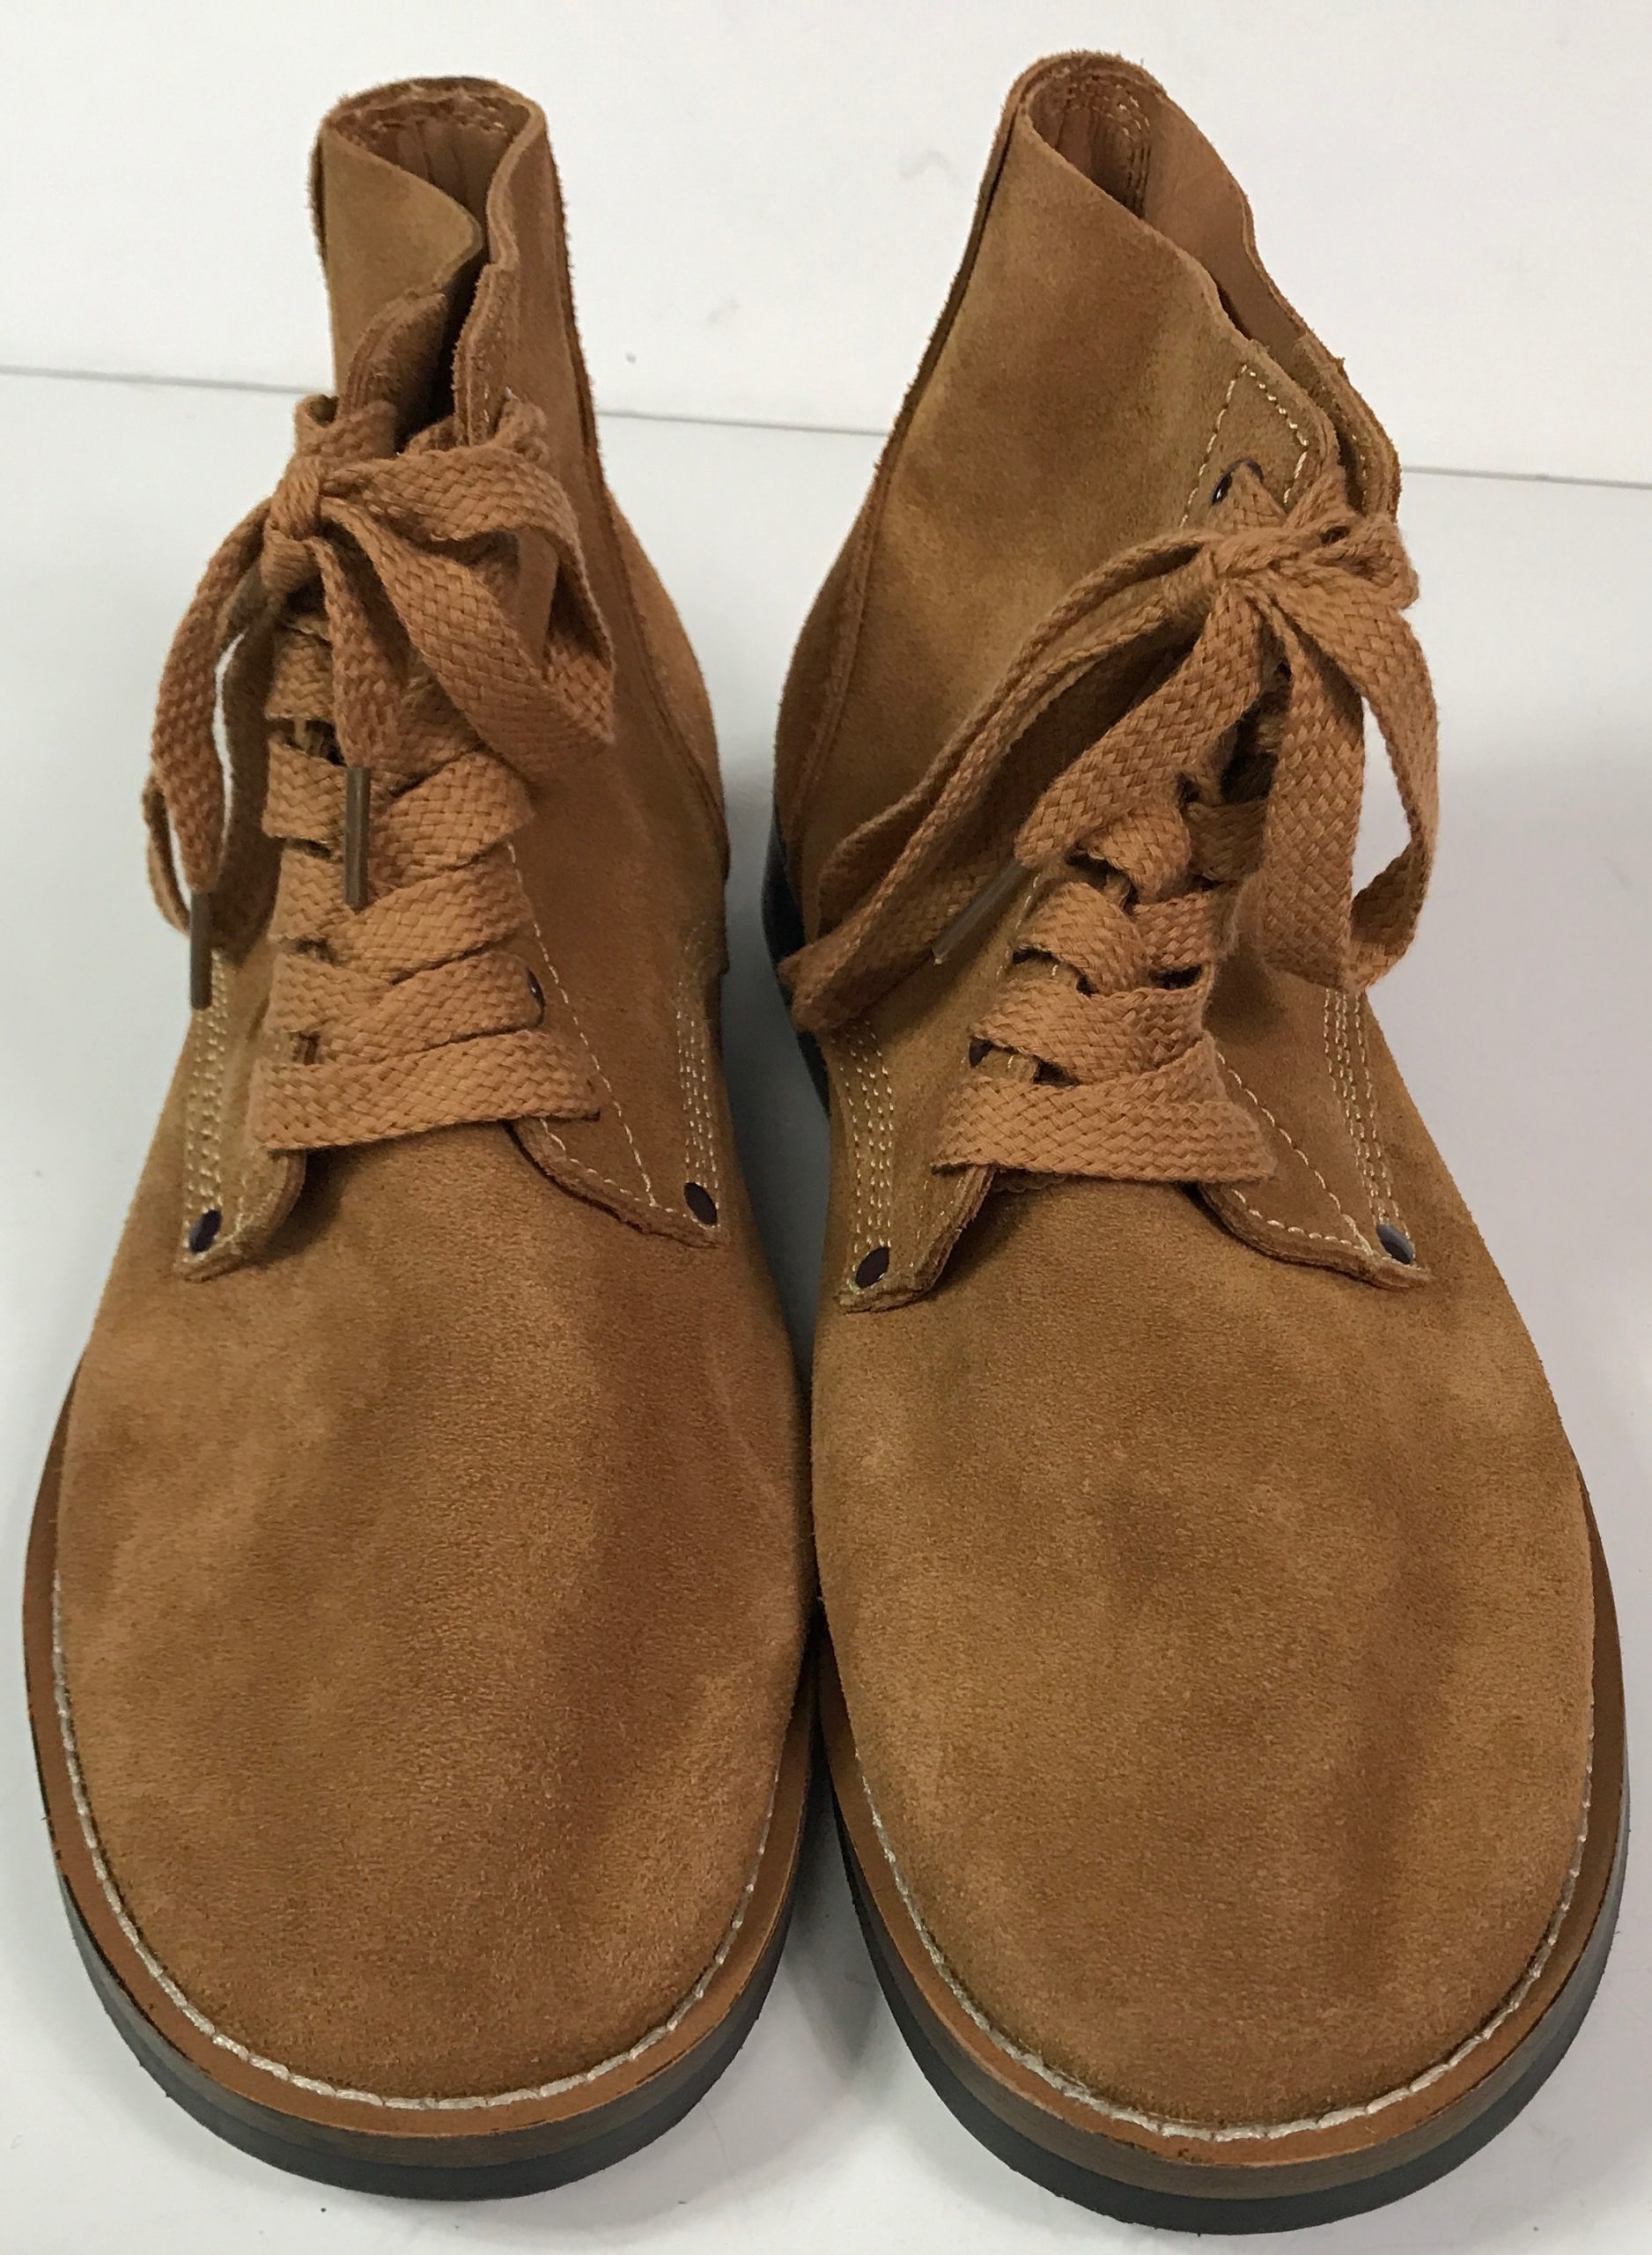 RUSSETS TYPE II “ROUGHT OUTS” COMBAT FIELD BOOTS | Man The Line